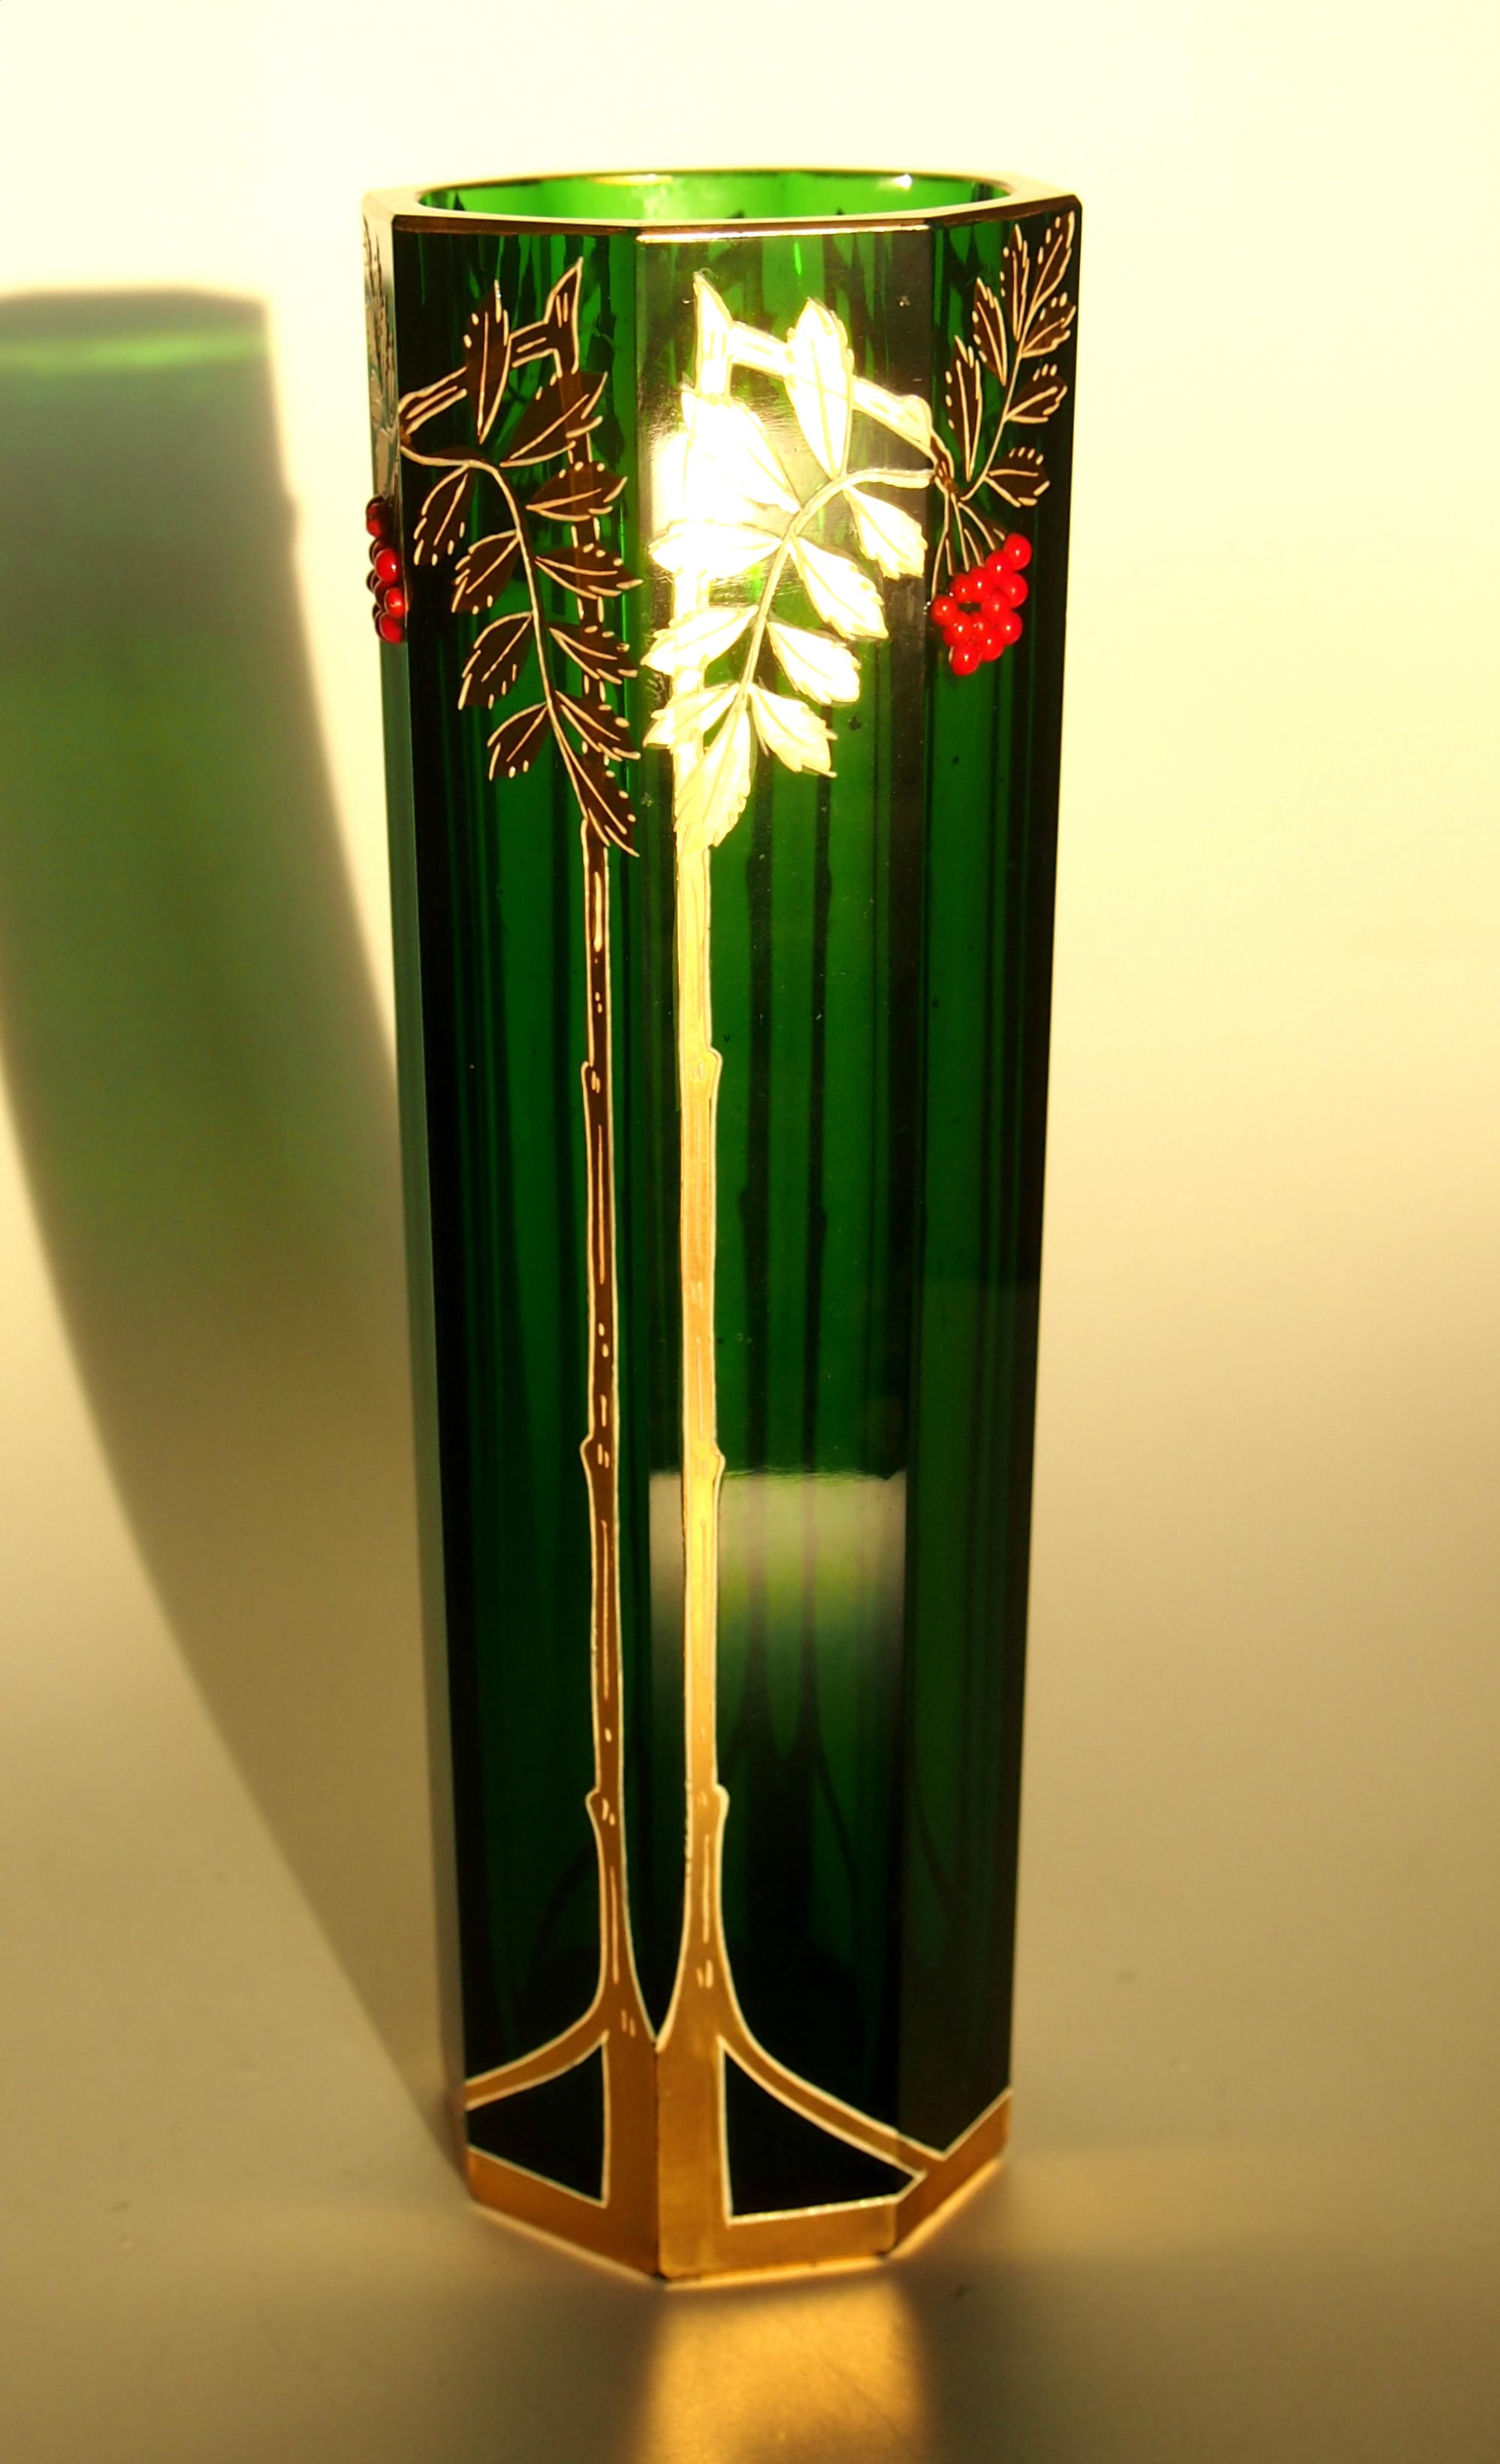 A super octagonal Riedel vase in green with gilding over white enamel and tiny applied red glass beads. Riedel used a combination of the European styles of the time merging elements of Art Nouveau, Jugendstil and Vienna Secessionism. The little